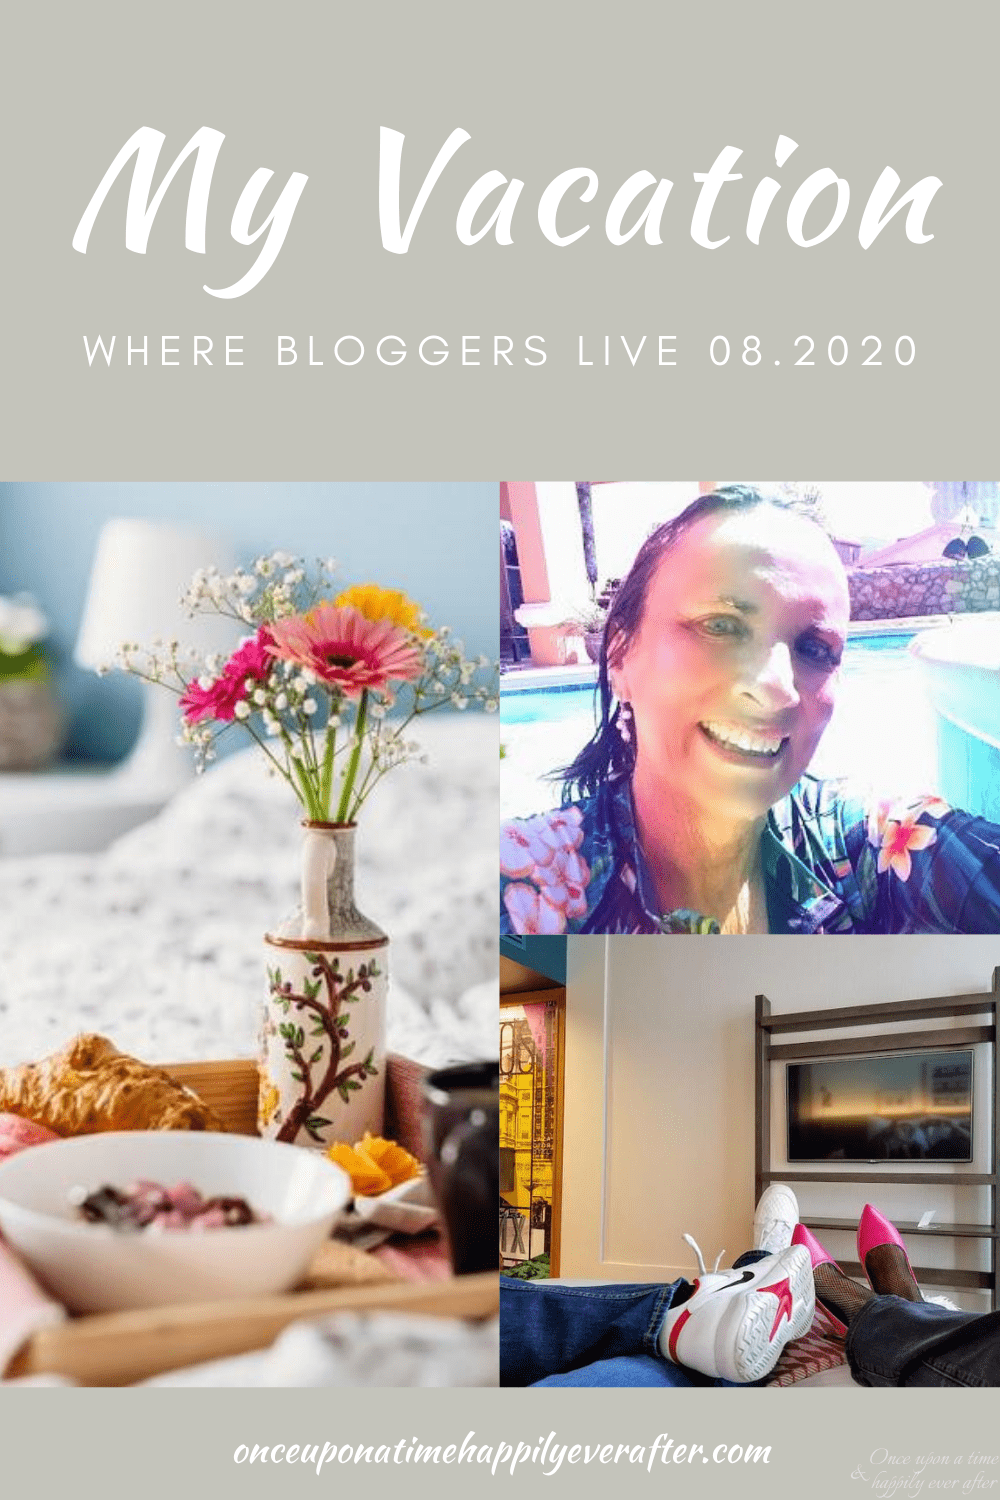 My Vacation: Where Bloggers Live 08.2020